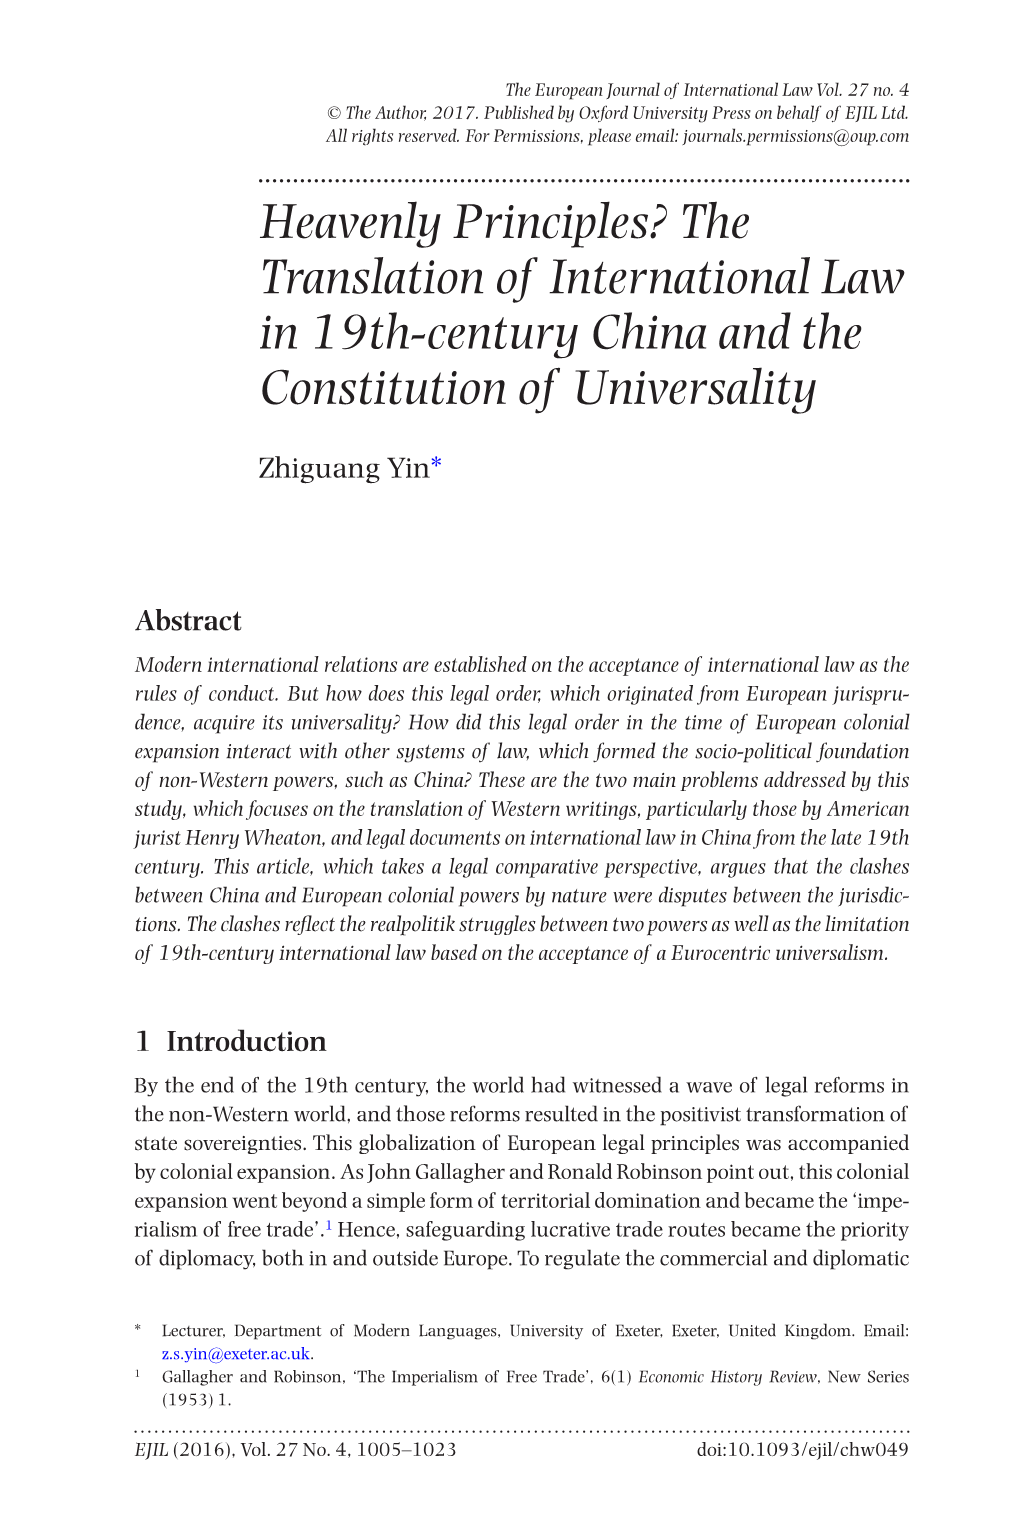 Heavenly Principles? the Translation of International Law in 19Th-Century China and the Constitution of Universality